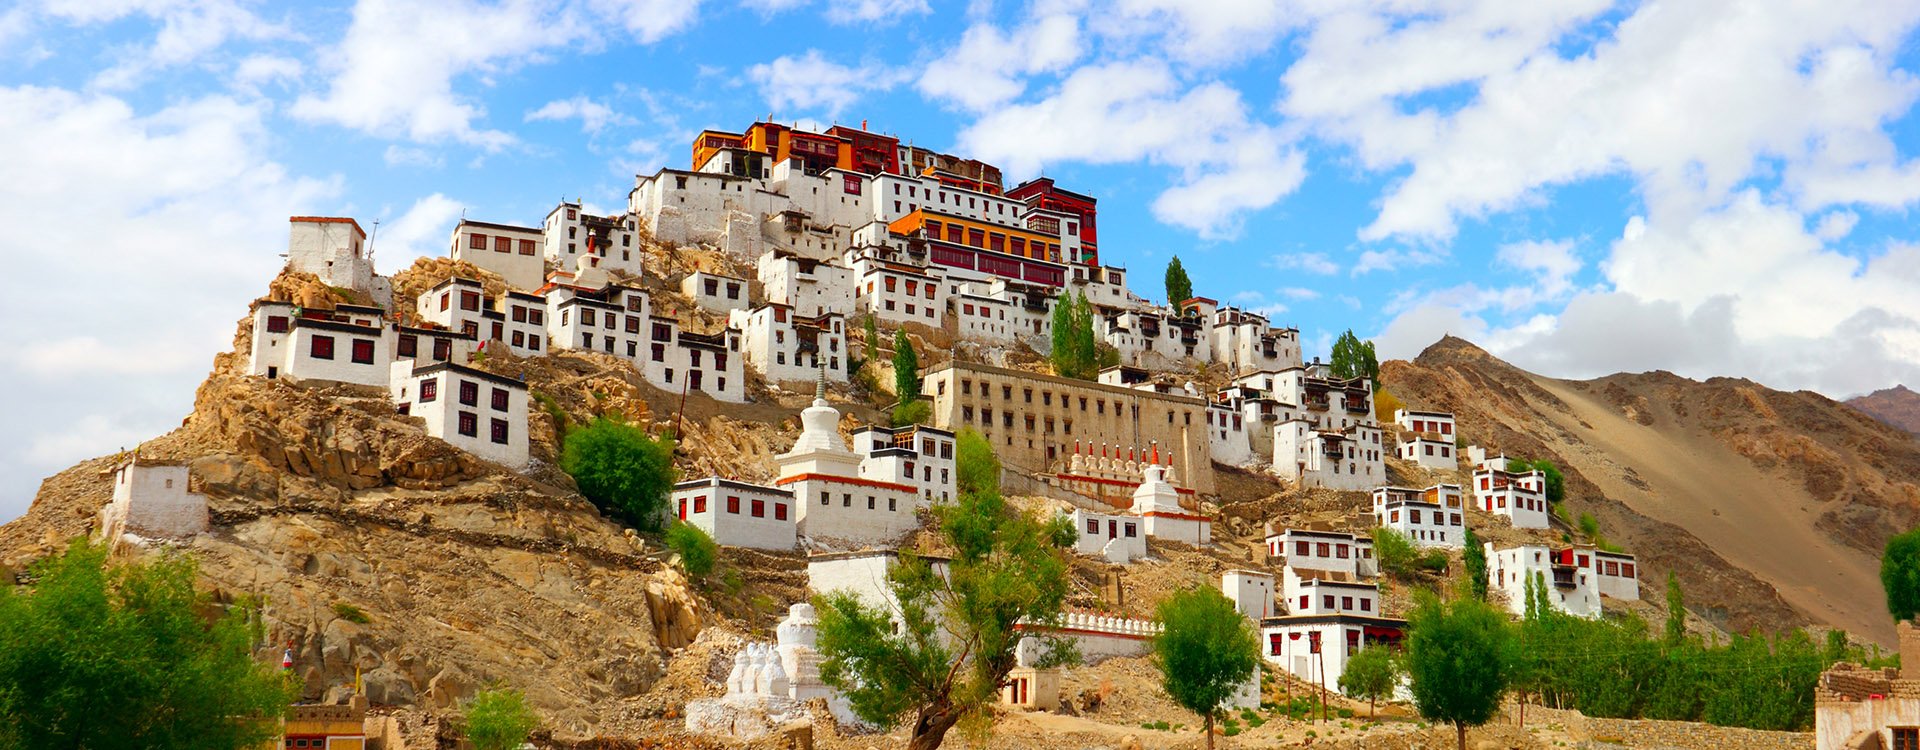 ancient Tiksey (Thiksey) Buddhist Monastery and traditional Tibetan houses against the background of blue sky - Leh district, Ladakh, Himalaya, Jammu & Kashmir, Northern India